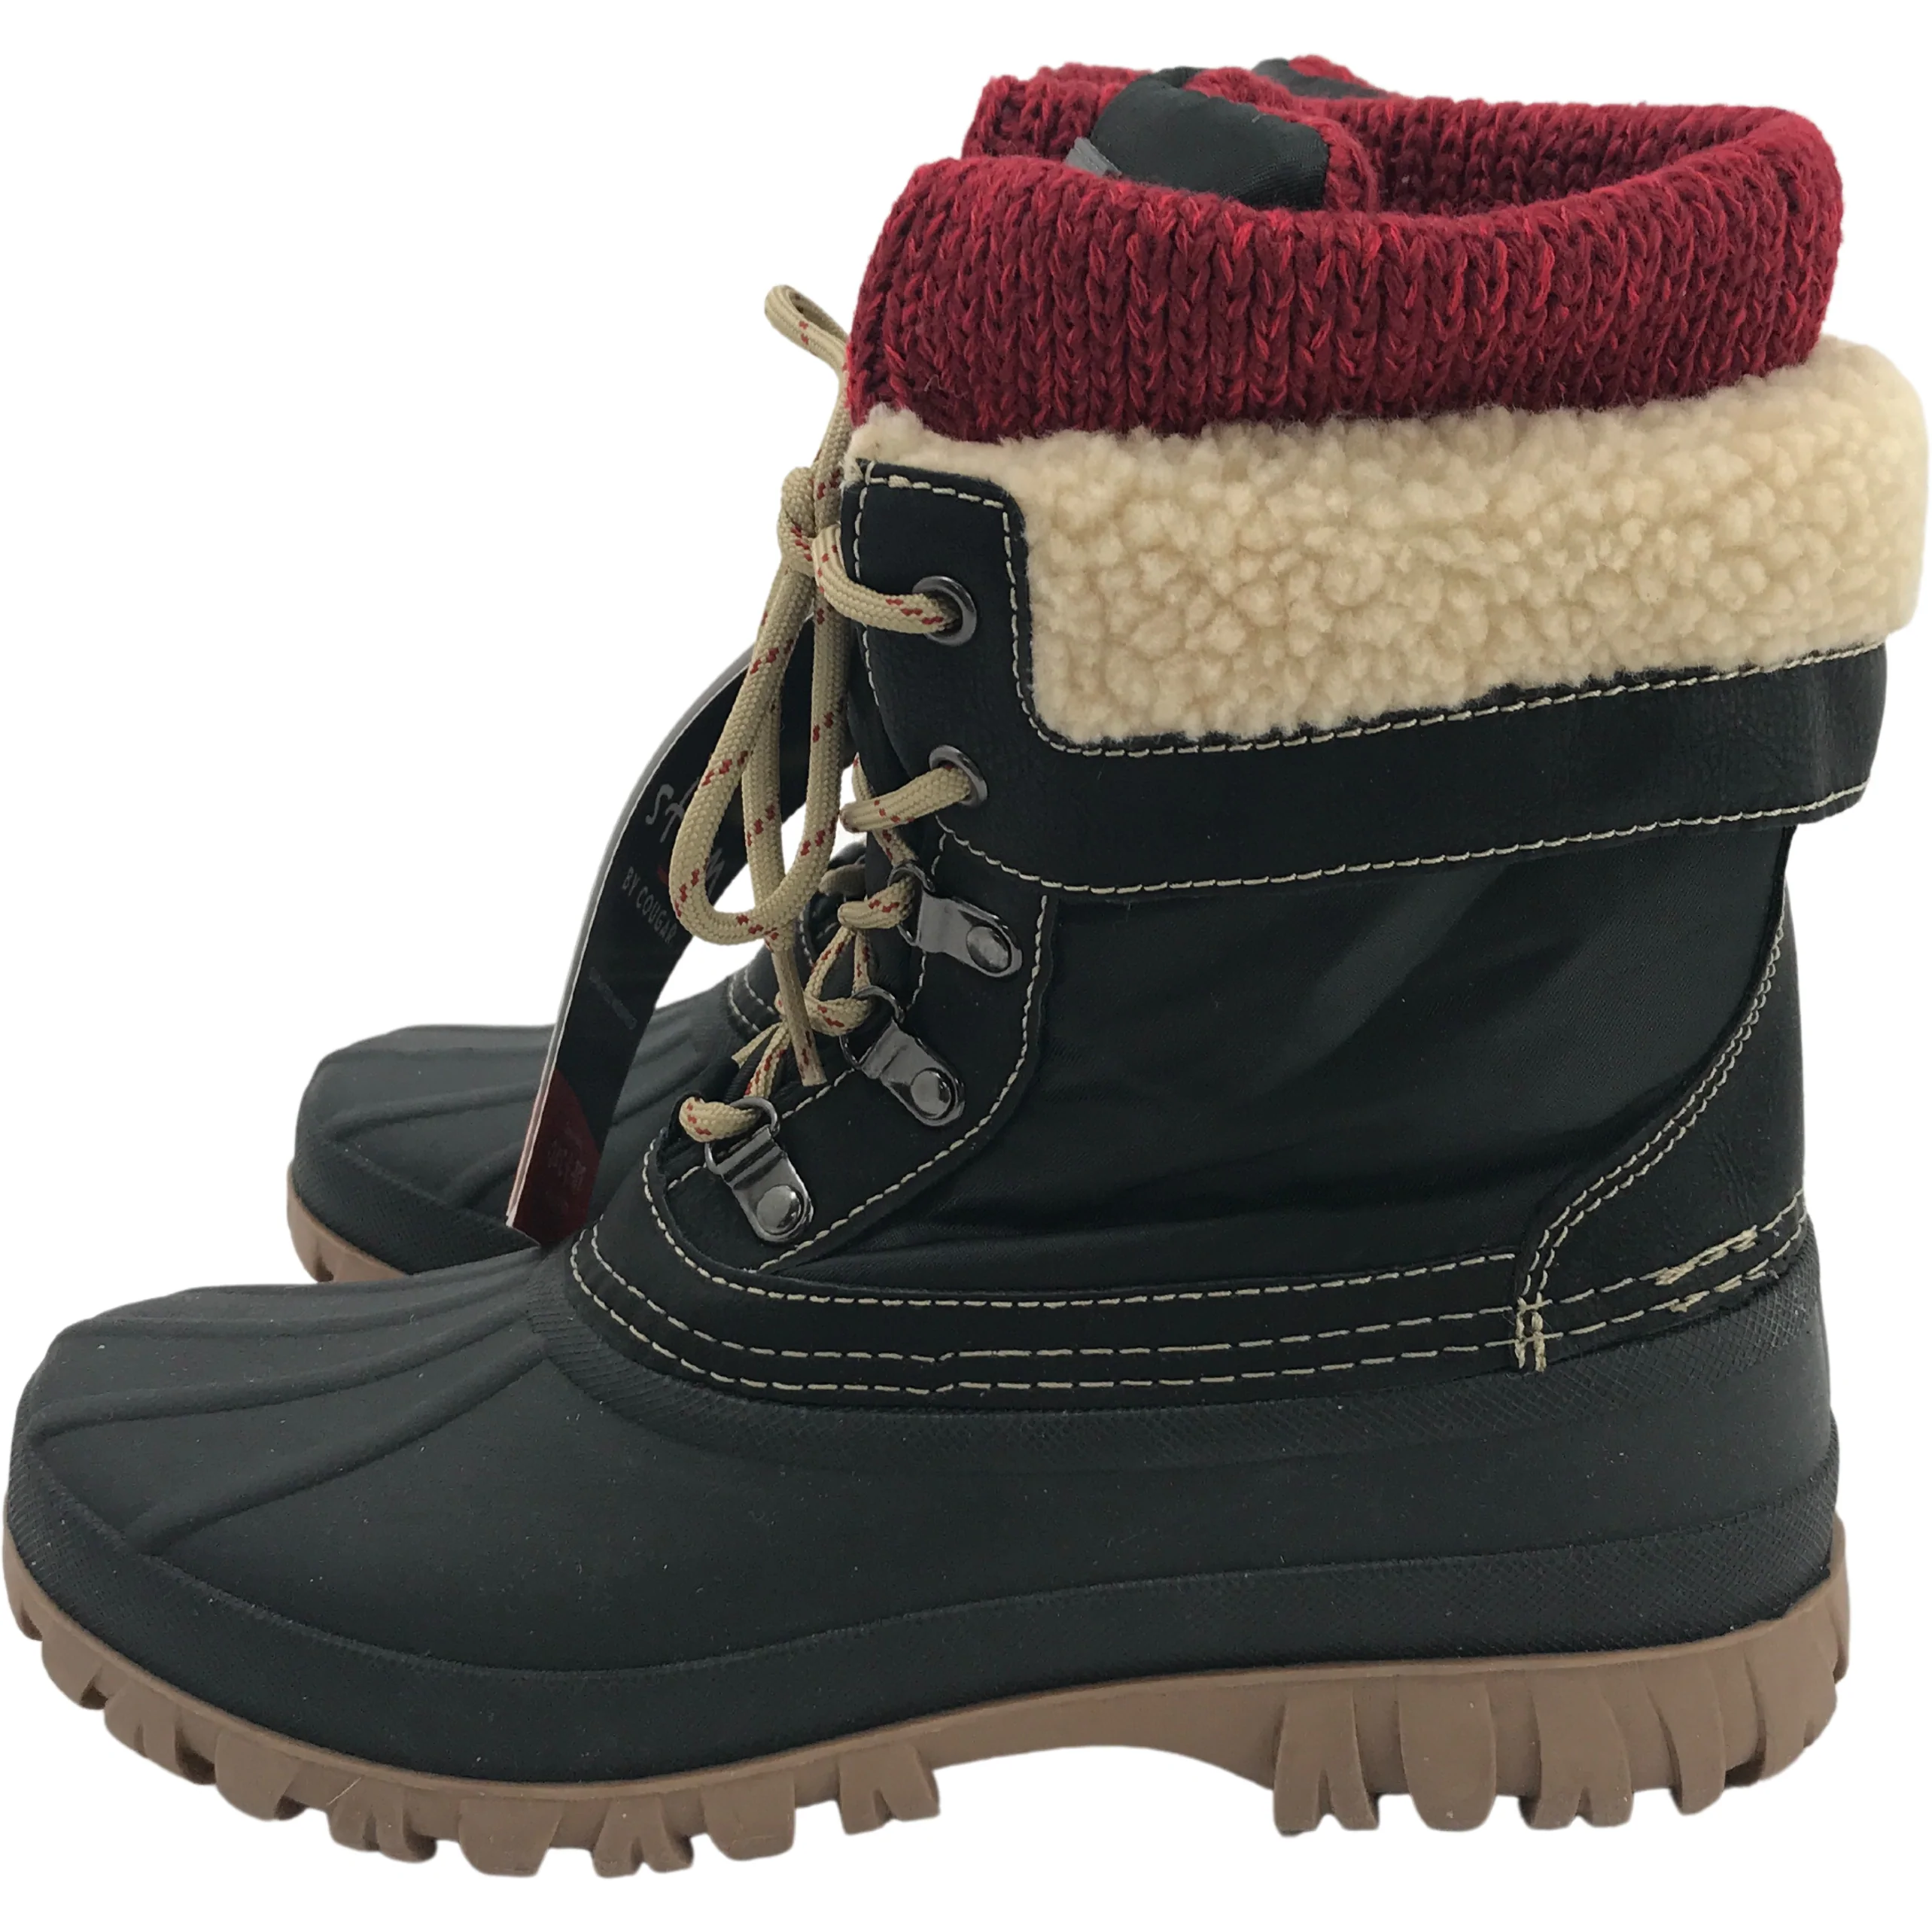 Storm by Cougar Women's Winter Boots / Short Boots / Creek Black / Various Sizes